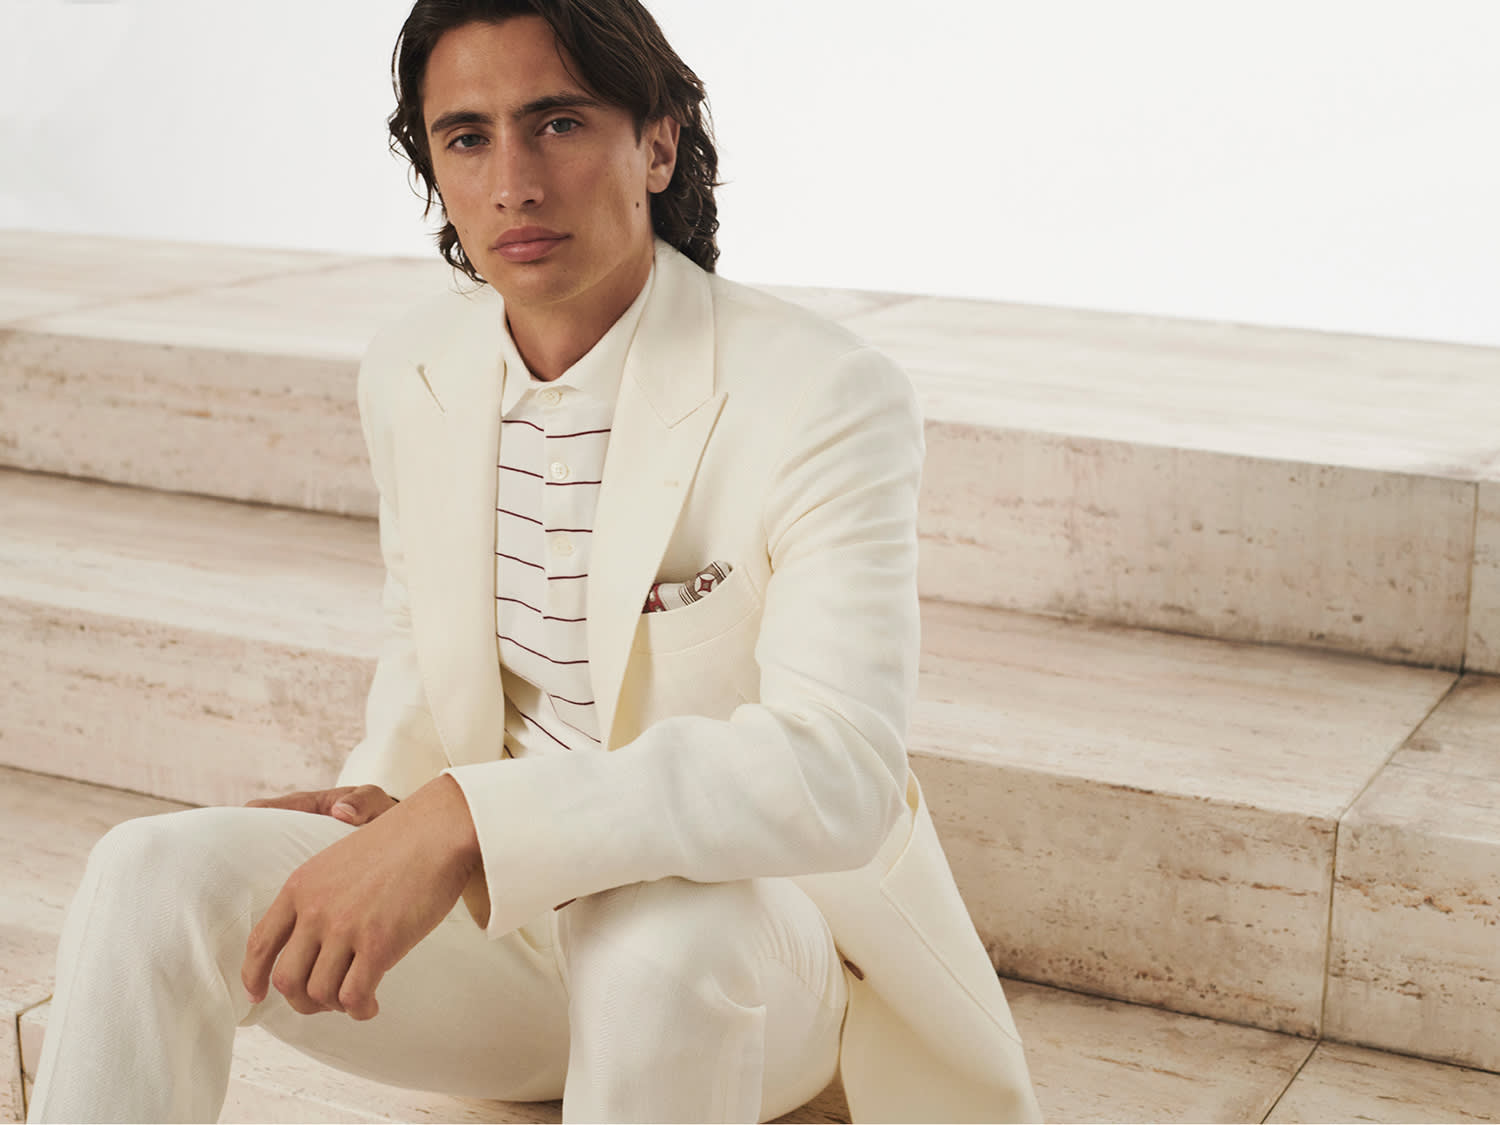 Brunello Cucinelli Spring/Summer 2021 Collection photographed by